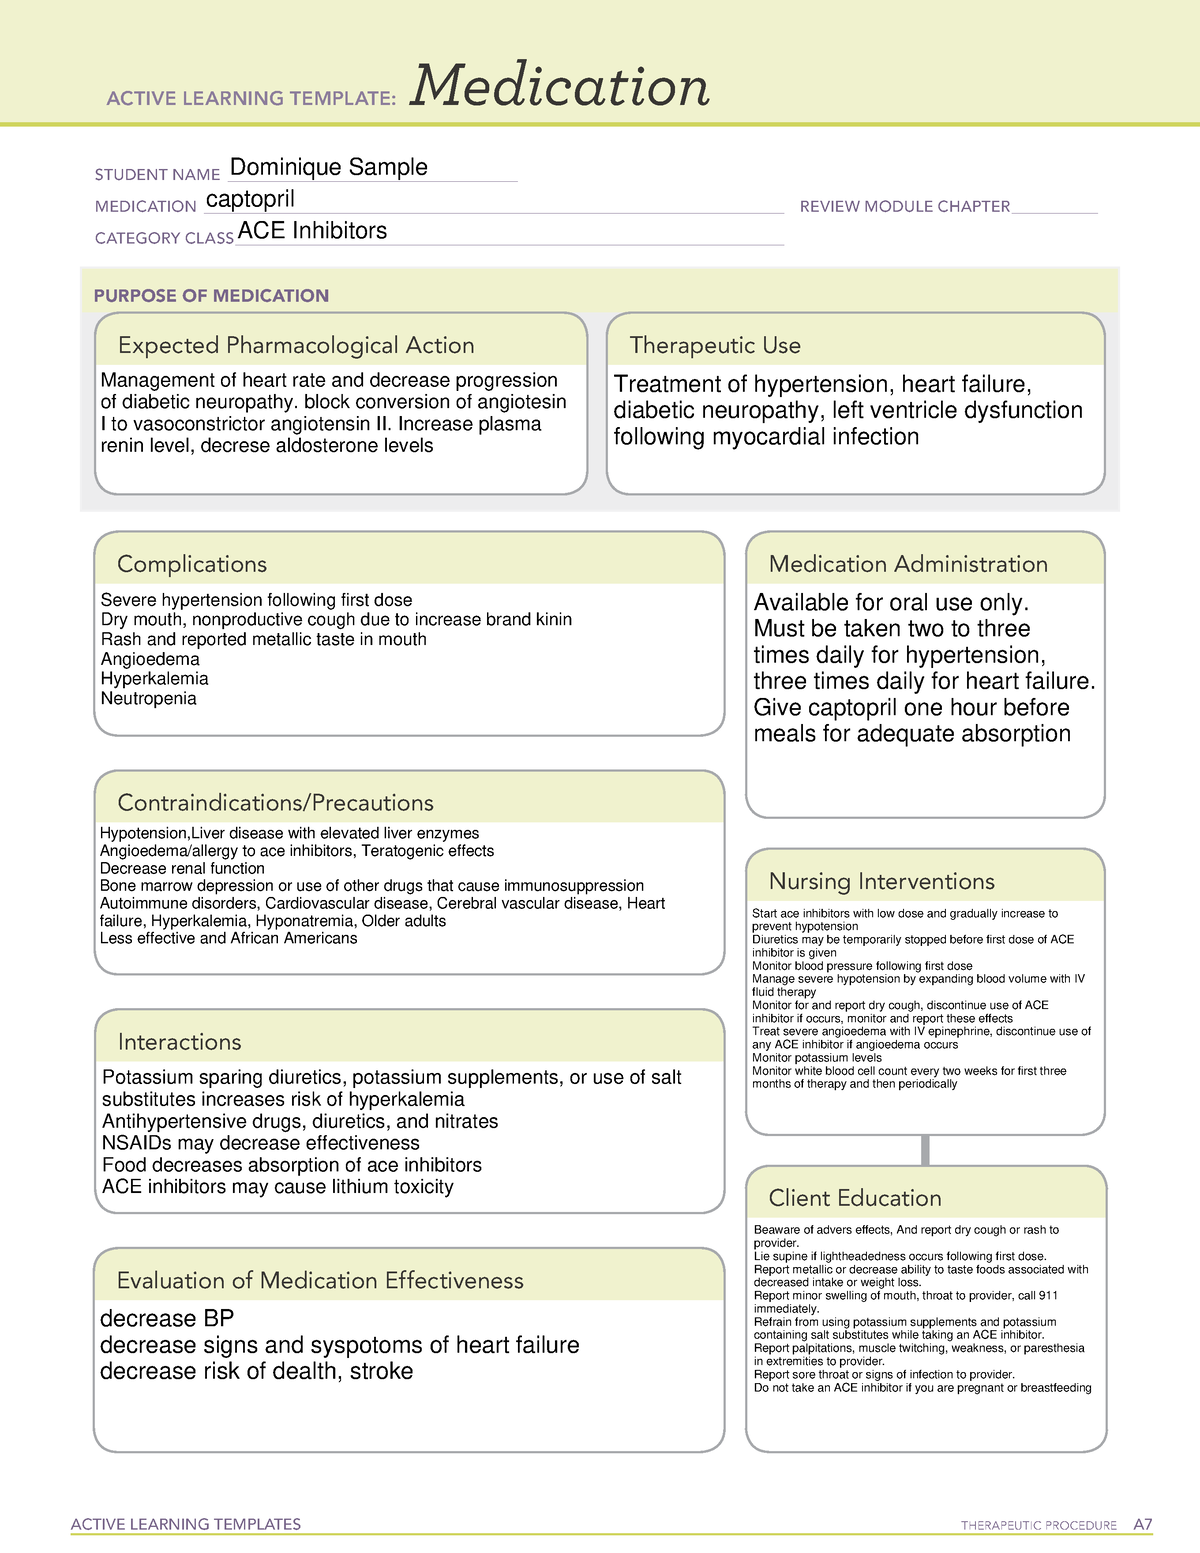 Captopril Active Learning Template ACTIVE LEARNING TEMPLATES